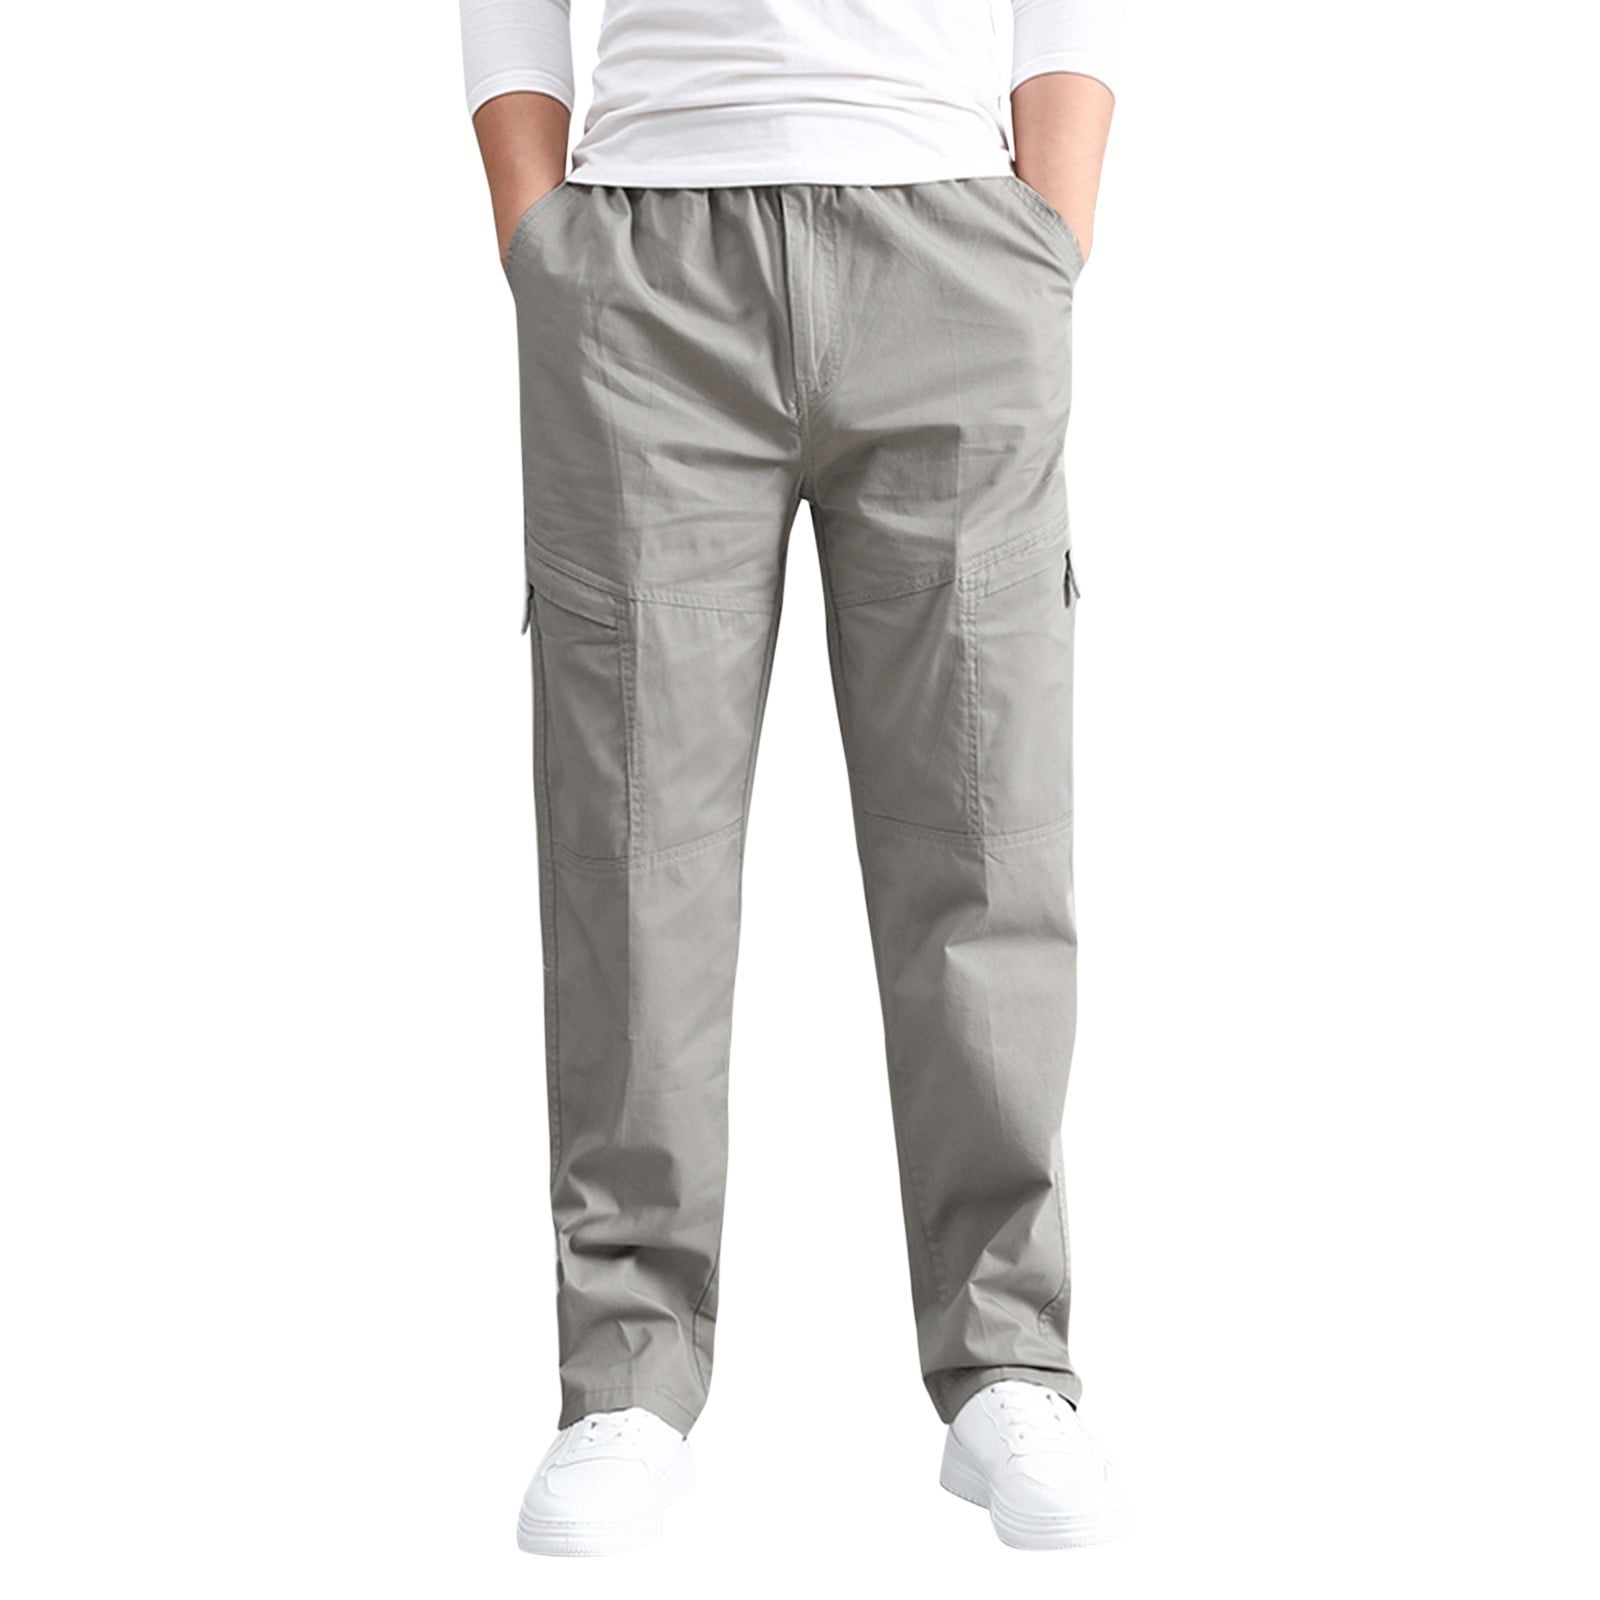 PMUYBHF Cargo Pants for Men Relaxed fit Mens Solid Color Summer Casual All  Match Pants Fashionable Woven Long Cargo Pants with Pockets Xl White Jeans  Men Big and Tall Size 46 